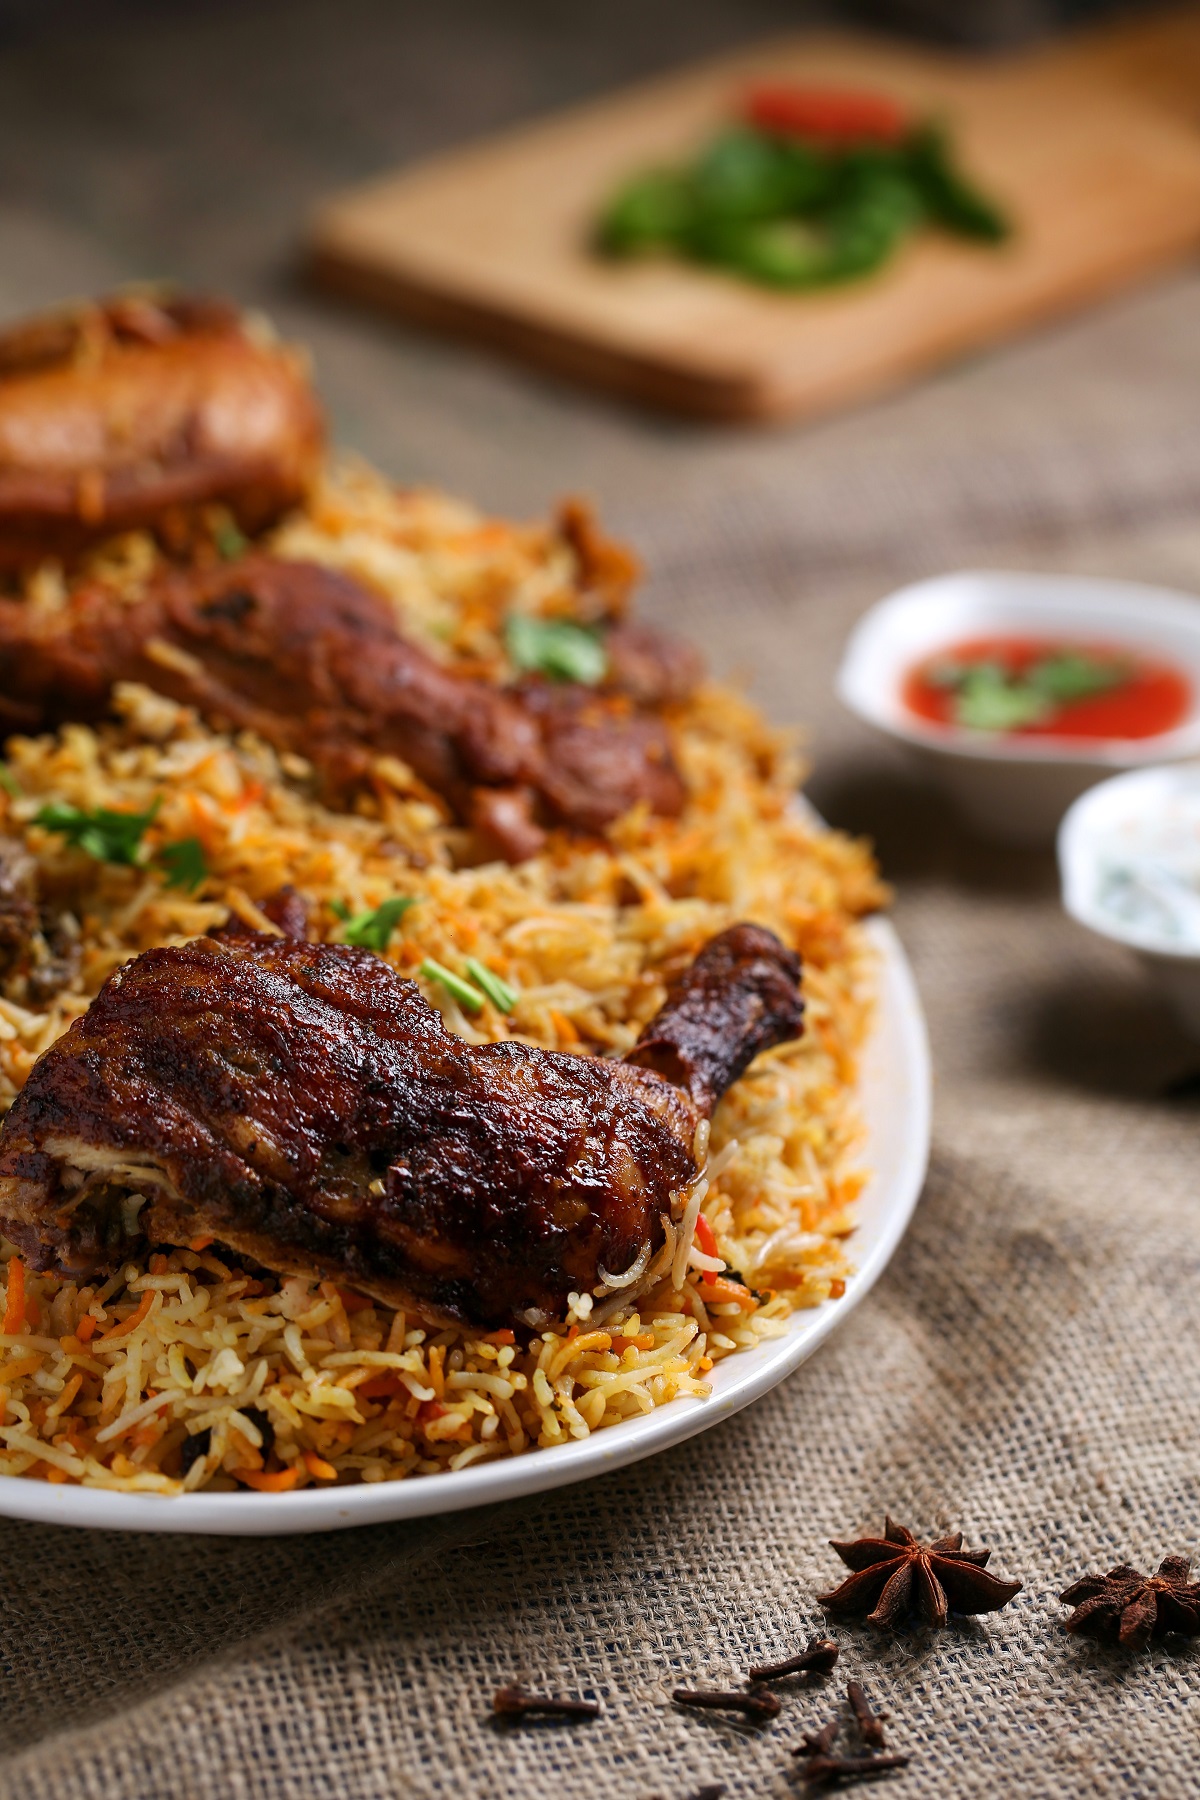 Heaping plate of spiced rice with roasted chicken